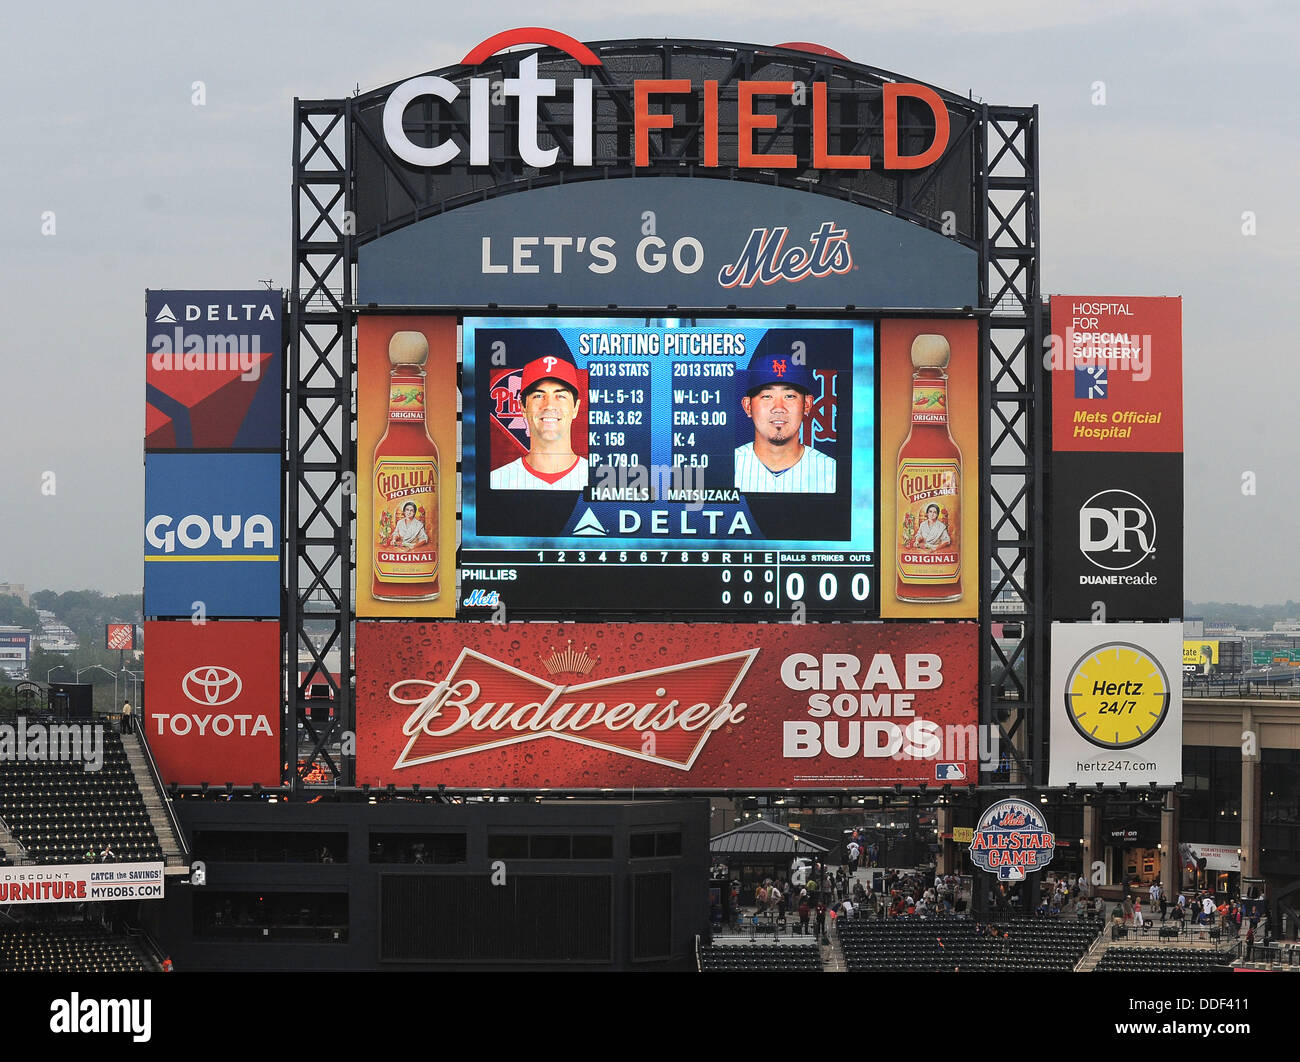 MLB LED Scoreboard for Opening Day 2019  dmmisc Miscellaneous Documentum  Information